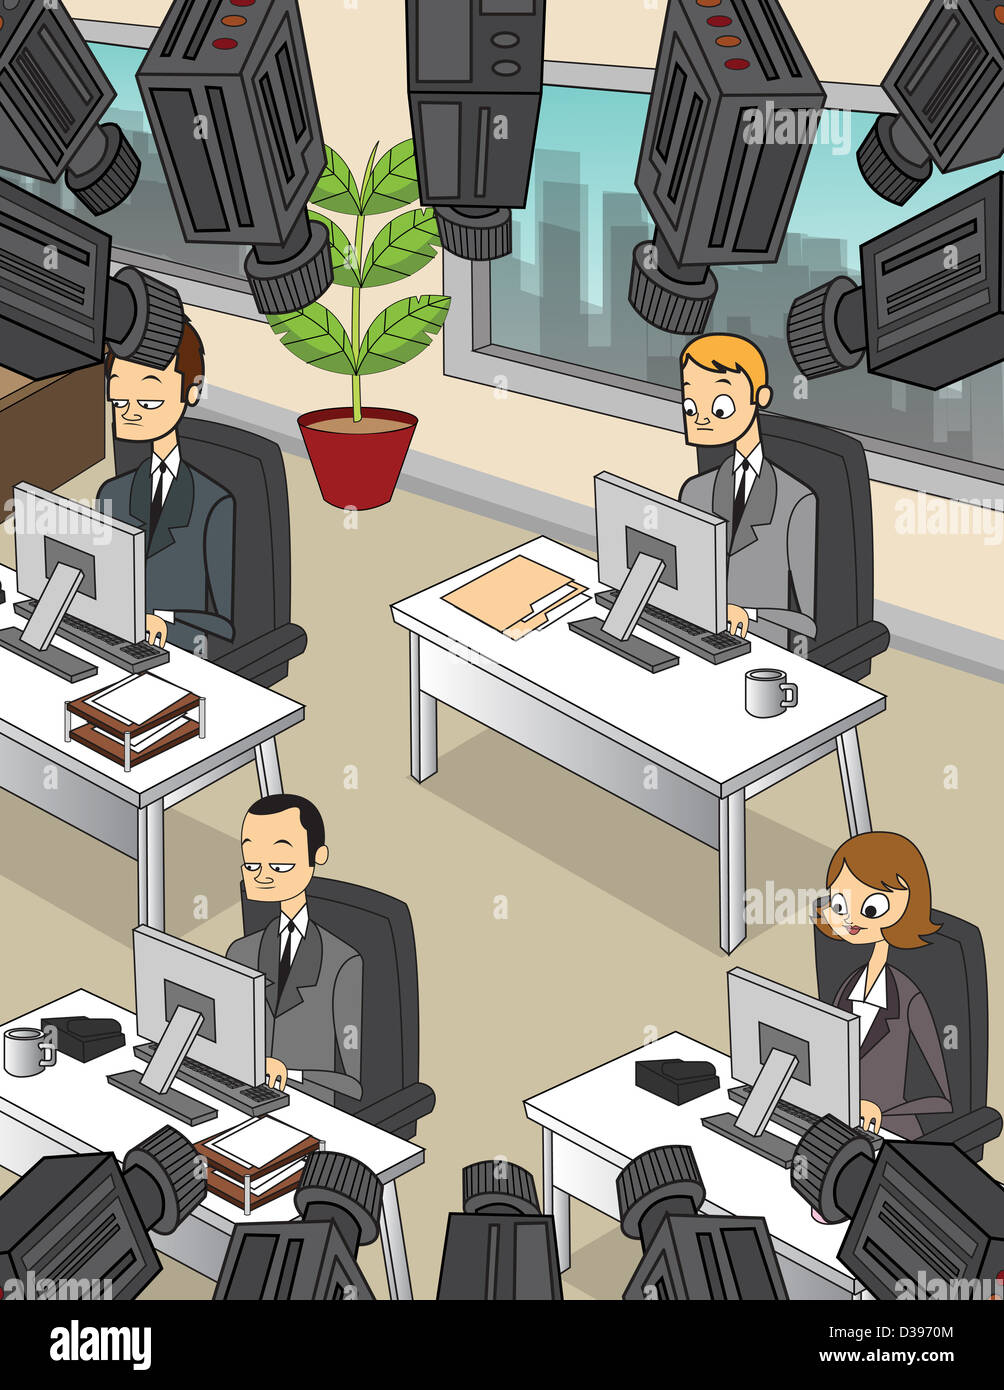 Conceptual illustration of business people working with security cameras depicting surveillance of employees Stock Photo